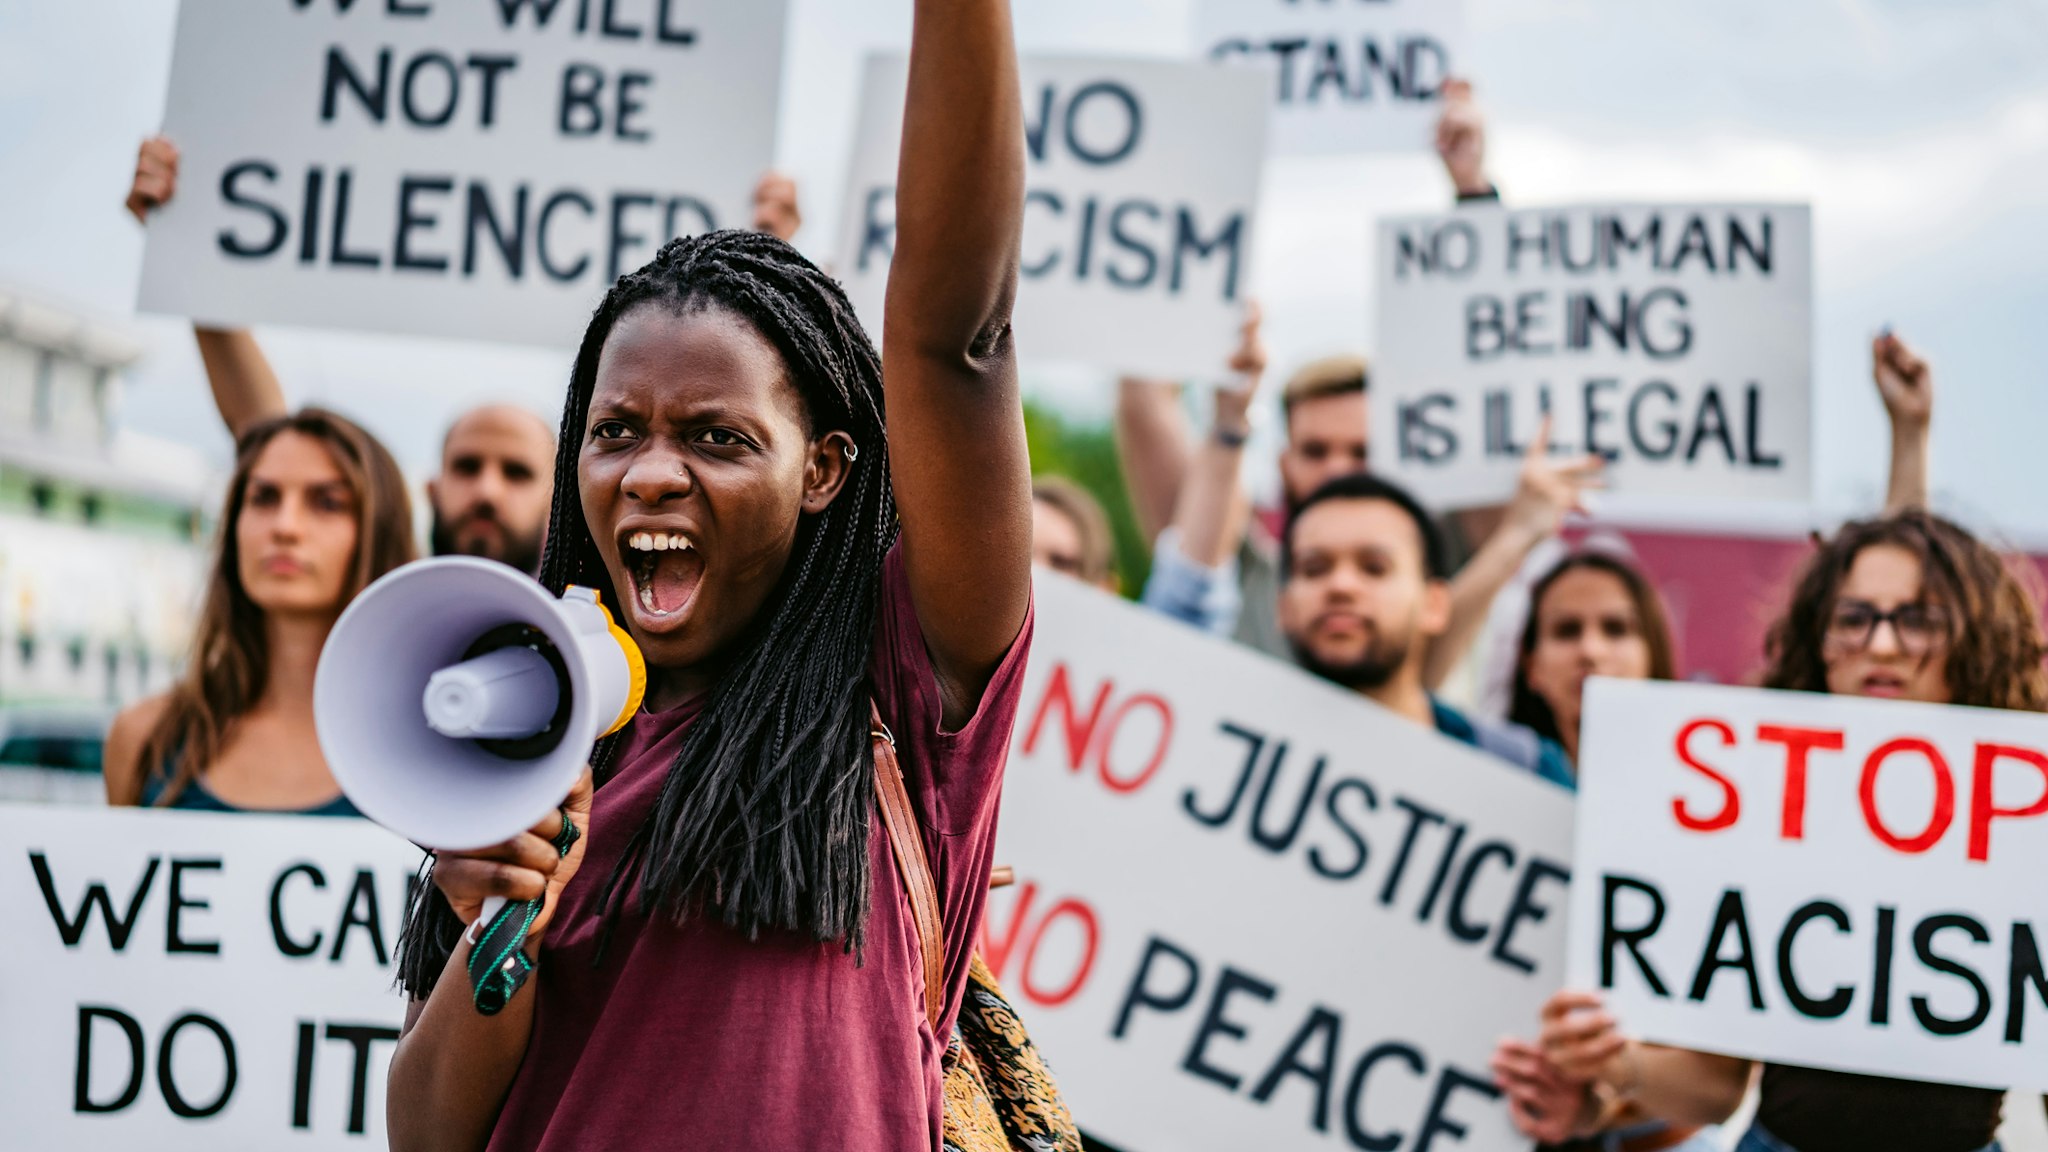 People on strike against racism - stock photo